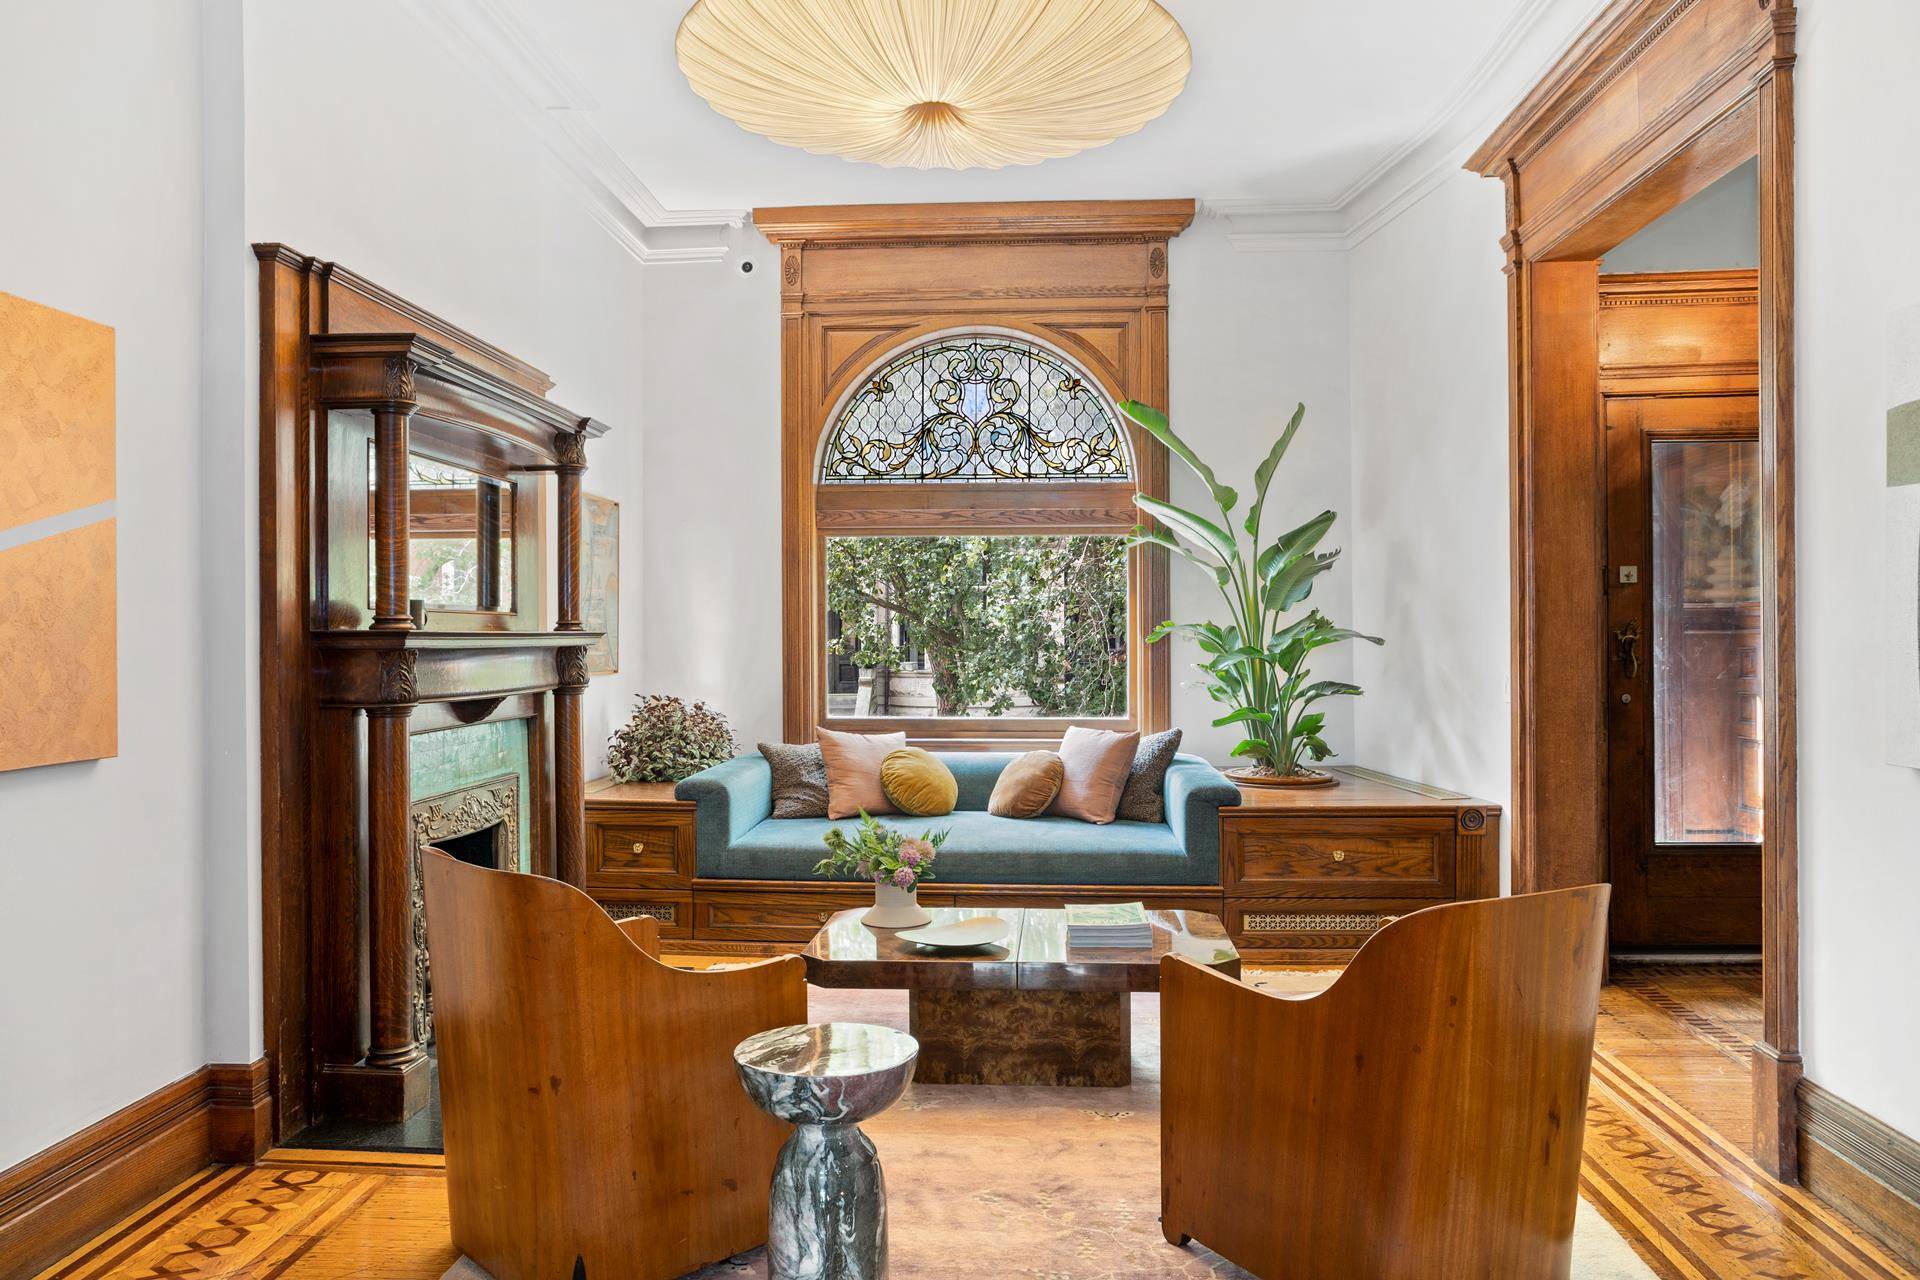 Built just before 1900, this Romanesque Revival townhouse underwent a two and a half year renovation, expanding its footprint and updating its amenities.